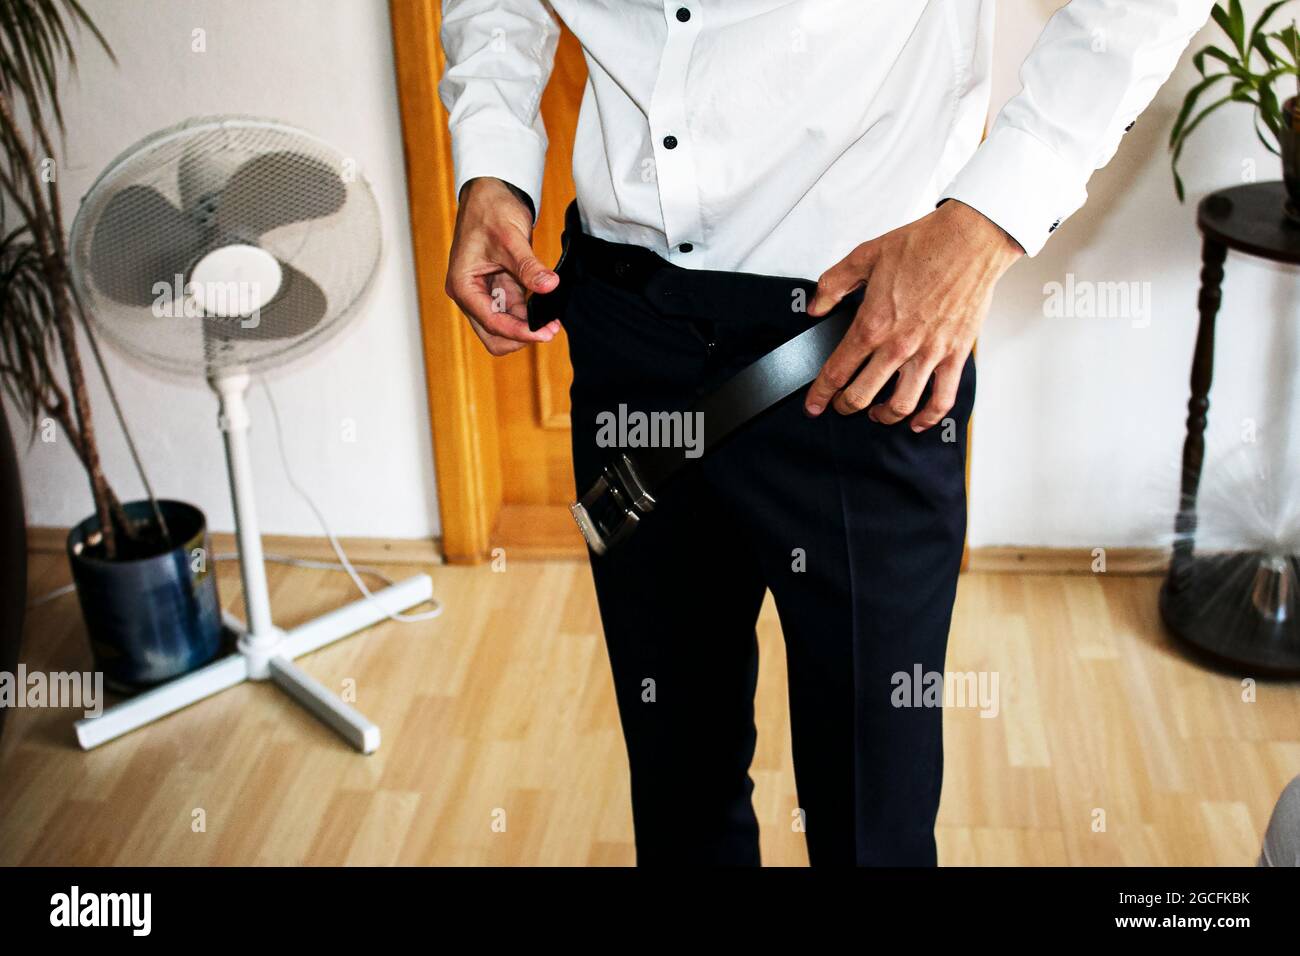 Man wears belt. Young businessman in casual suit with accessories. Fashion and clothing concept. Groom getting ready in morning before ceremony. Stock Photo